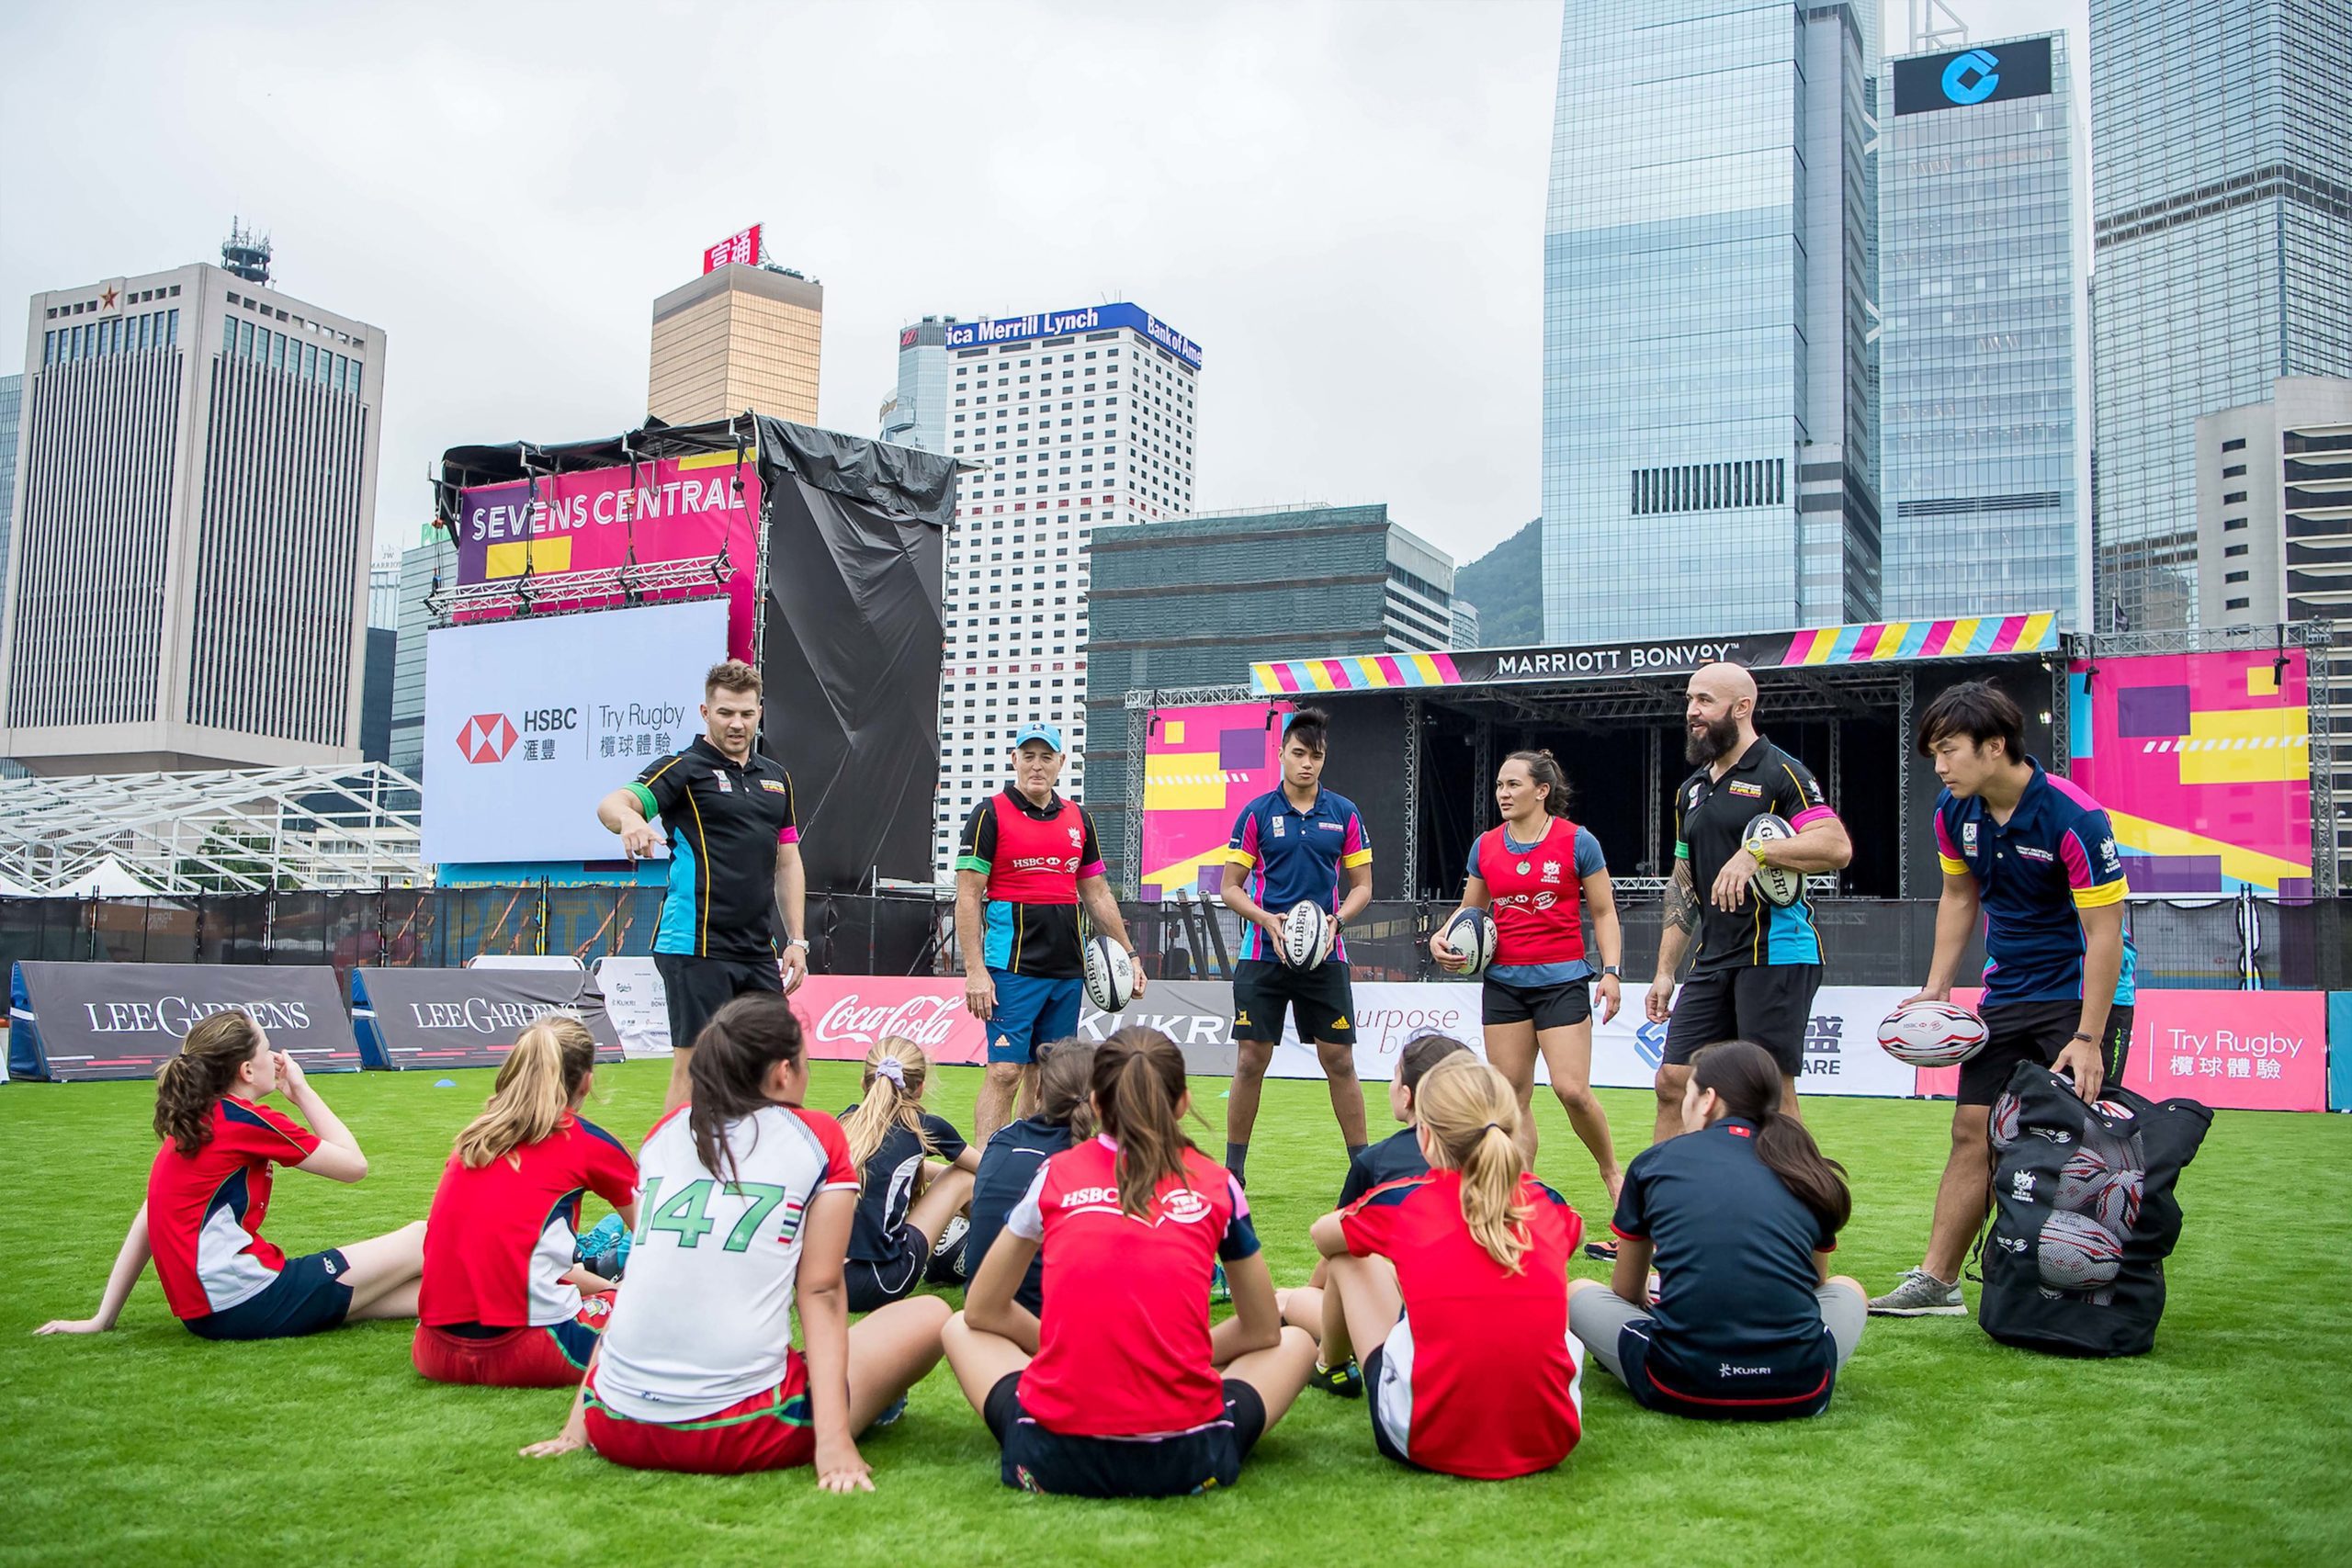 Hong Kong Sevens Festival Events Branding Marketing 2019 Group of Rugby Players